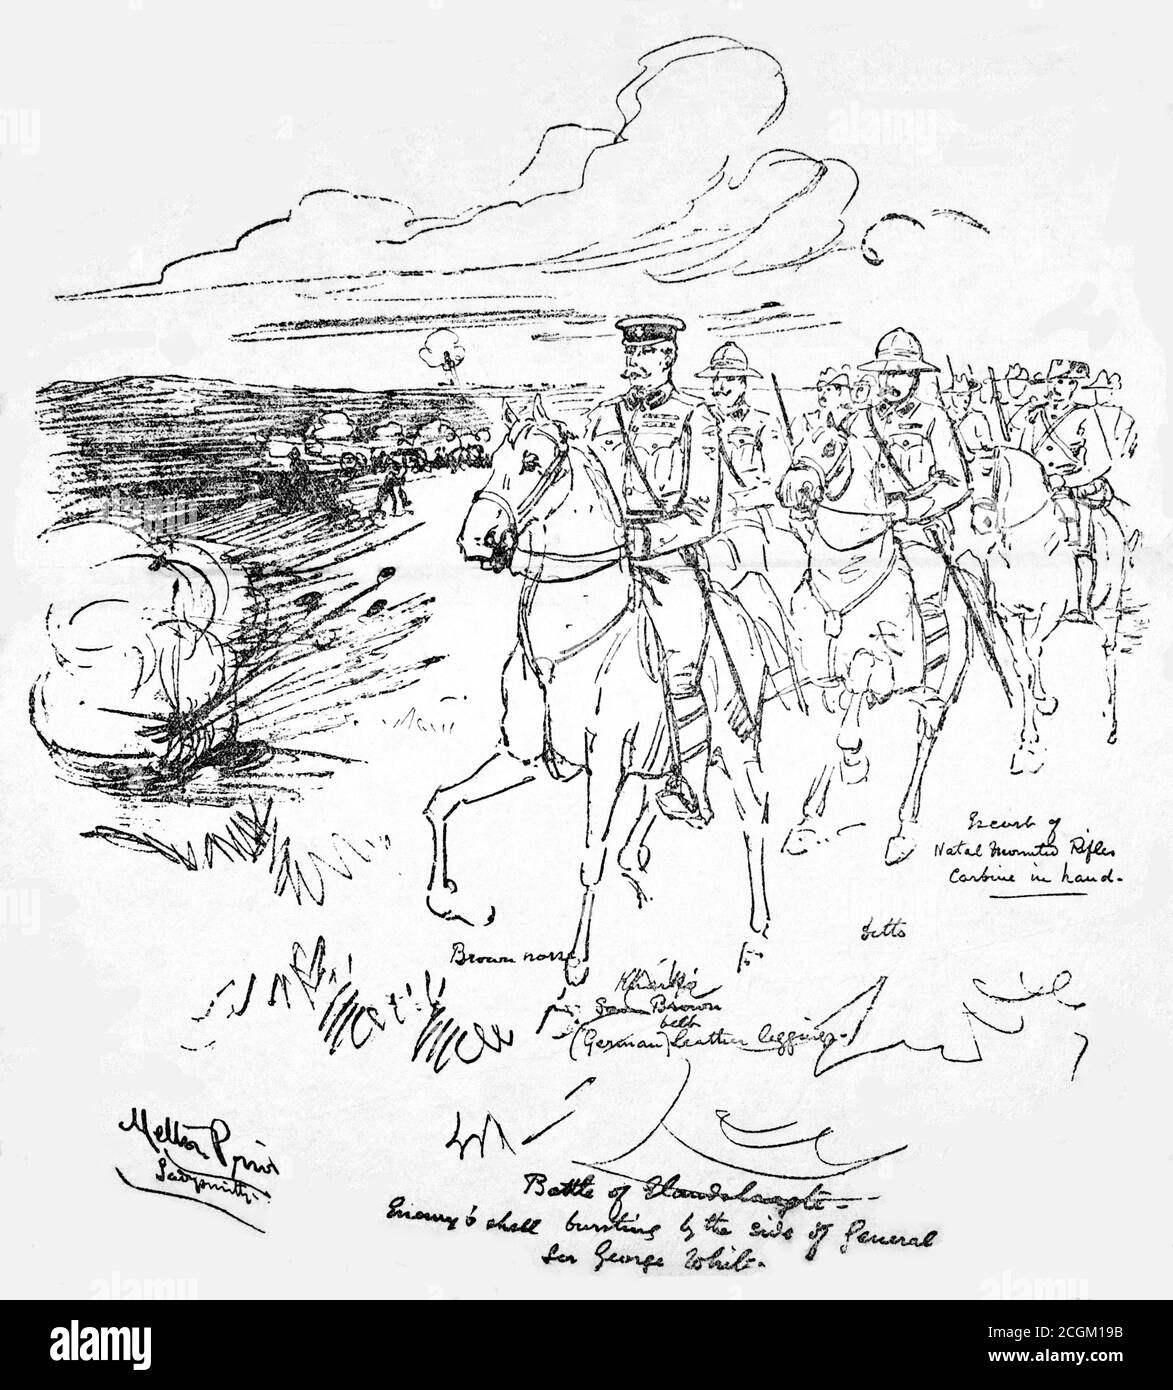 A historical contemporary newspaper cutting titled 'Mr. Melton Prior's first sketch from the front.' showing a sketch of General Roberts leading the Natal Mounted Rifles at the Battle of Elandslaagte with a field artillery battery in the background. Published in the Daily Mail on 21st November 1899, just one month after the battle. Stock Photo